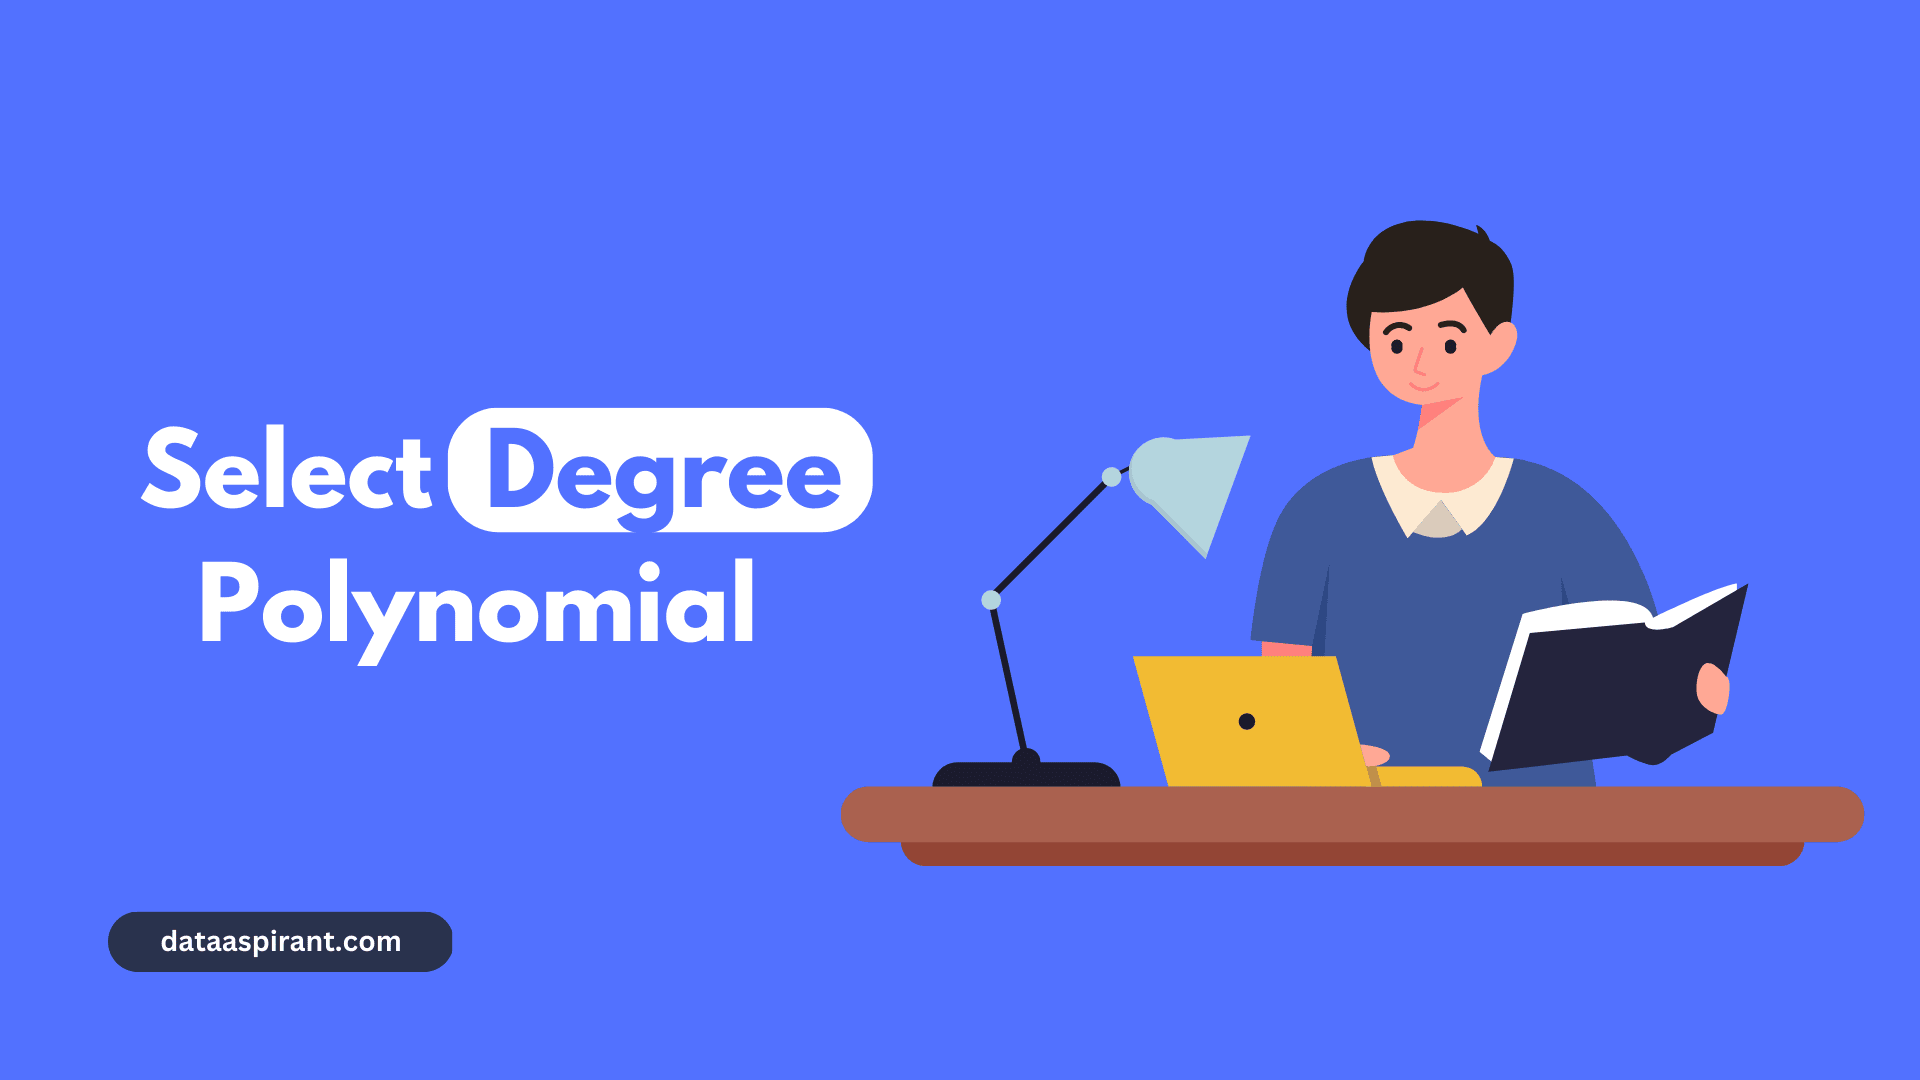 Select the Best Degree for Polynomial